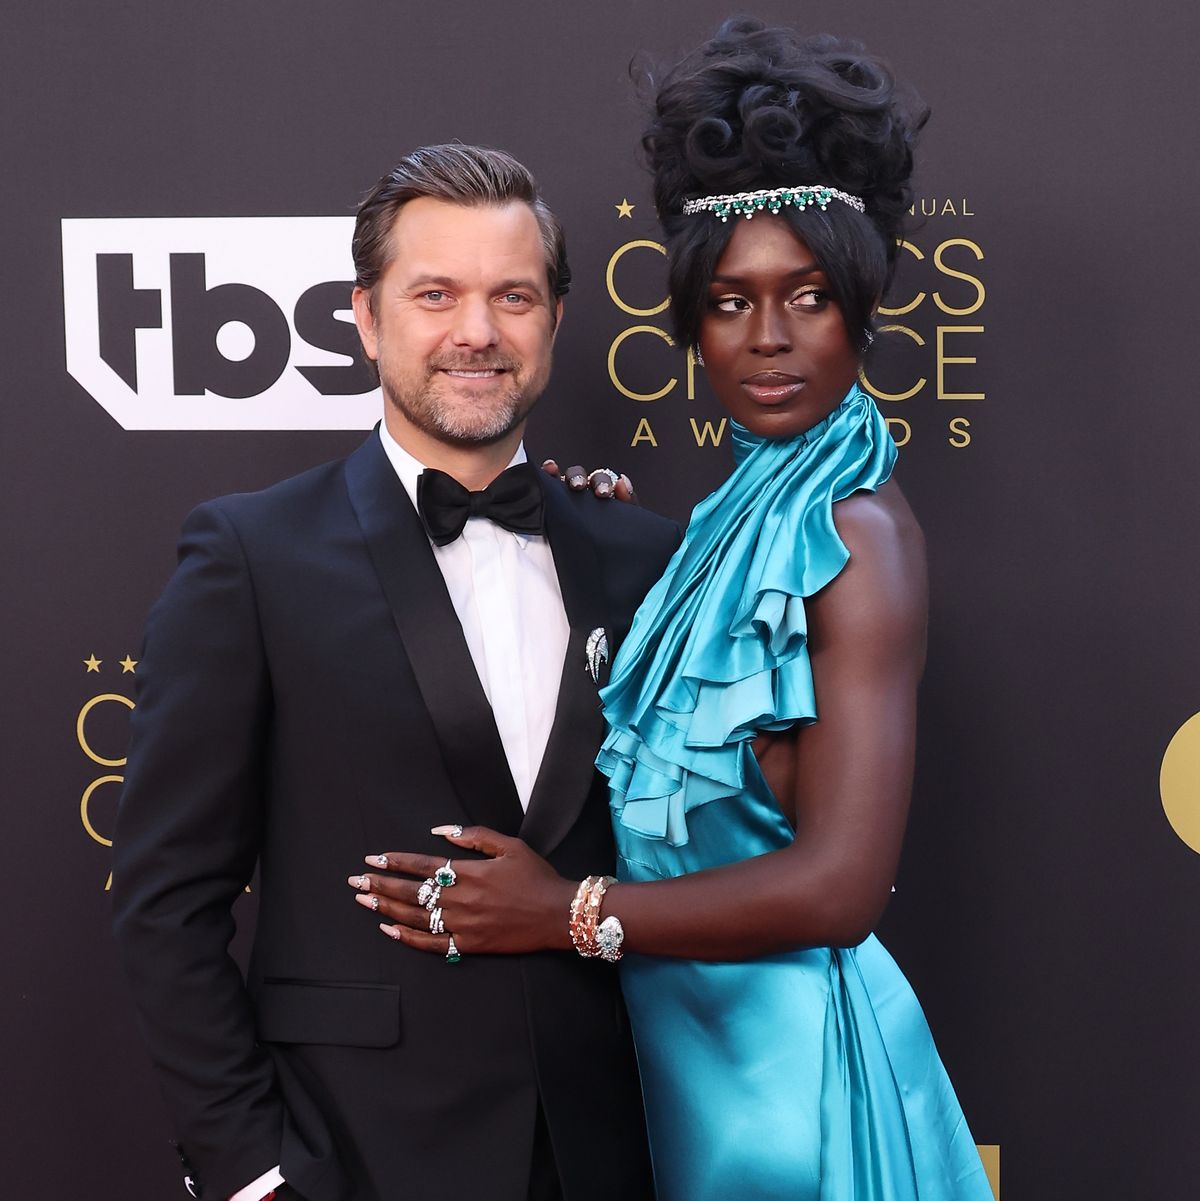 Jodie Turner Smith Nude - Jodie Turner-Smith poses totally naked with husband Joshua Jackson